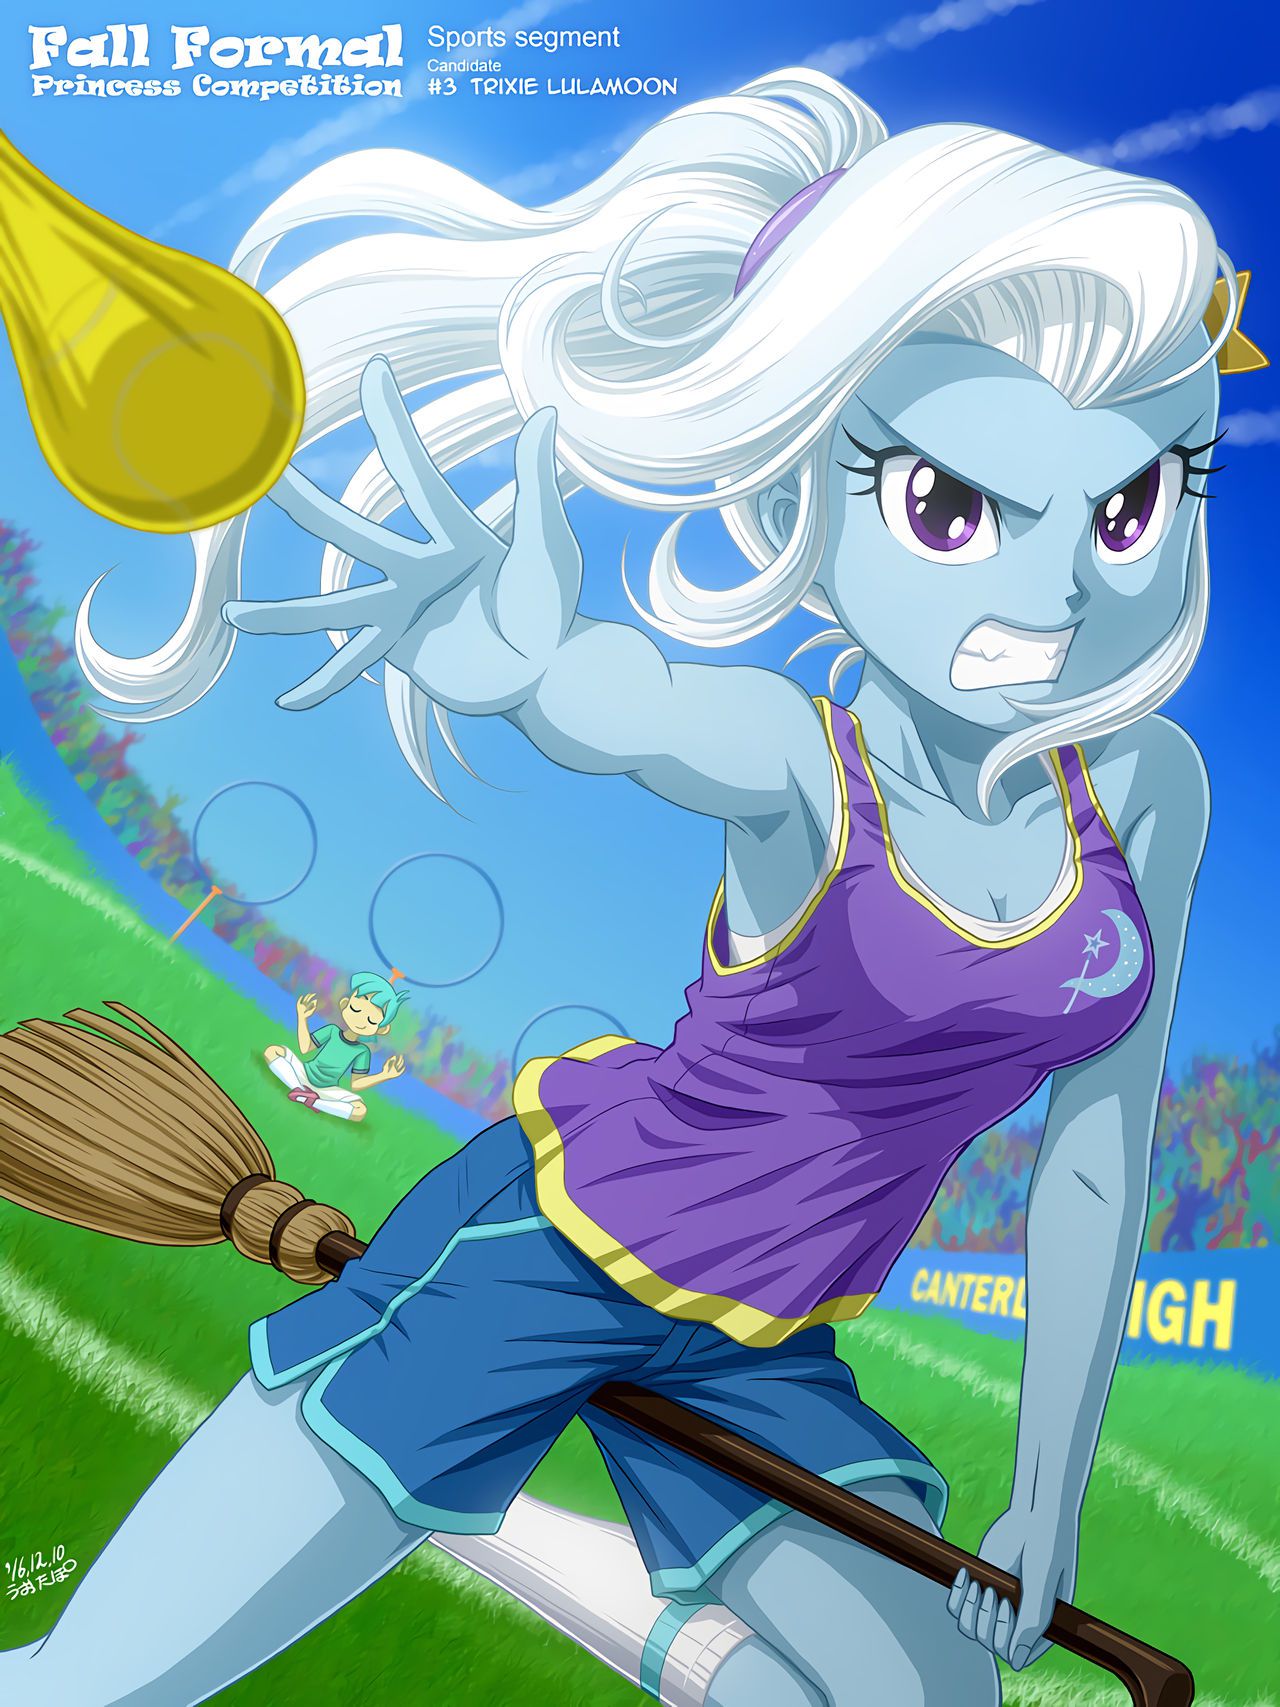 [uotapo] Fall Formal Princess Competition Sports Segment [optimized] [webp torrent] 3